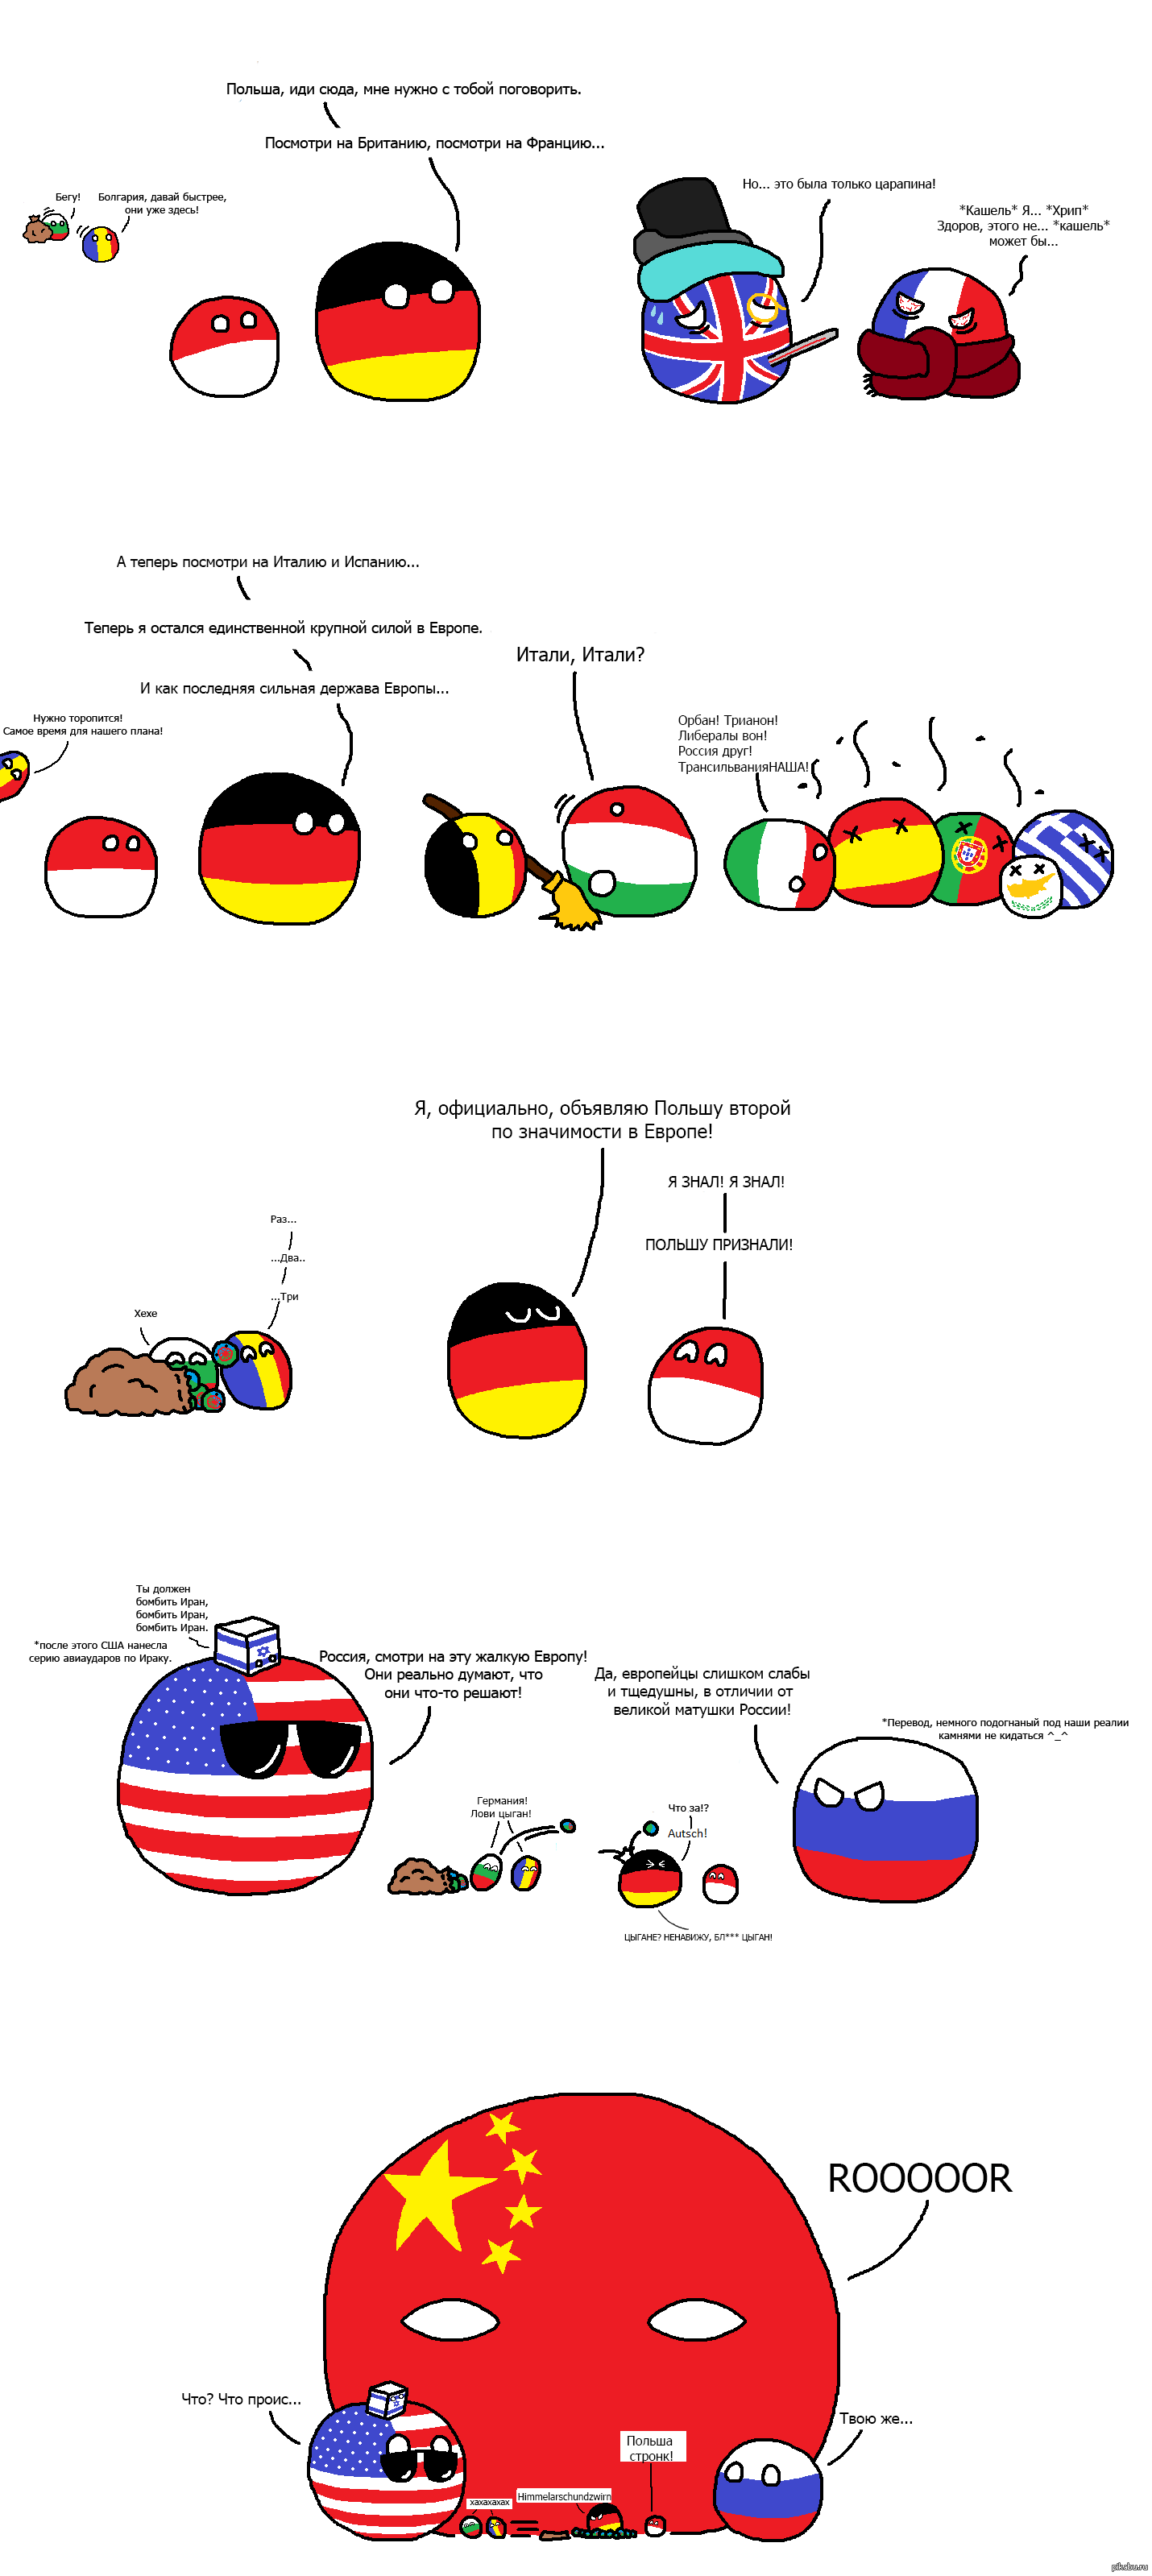 Poland and its recognition. - Countryballs, Poland, Russia, China, USA, And so on., Other